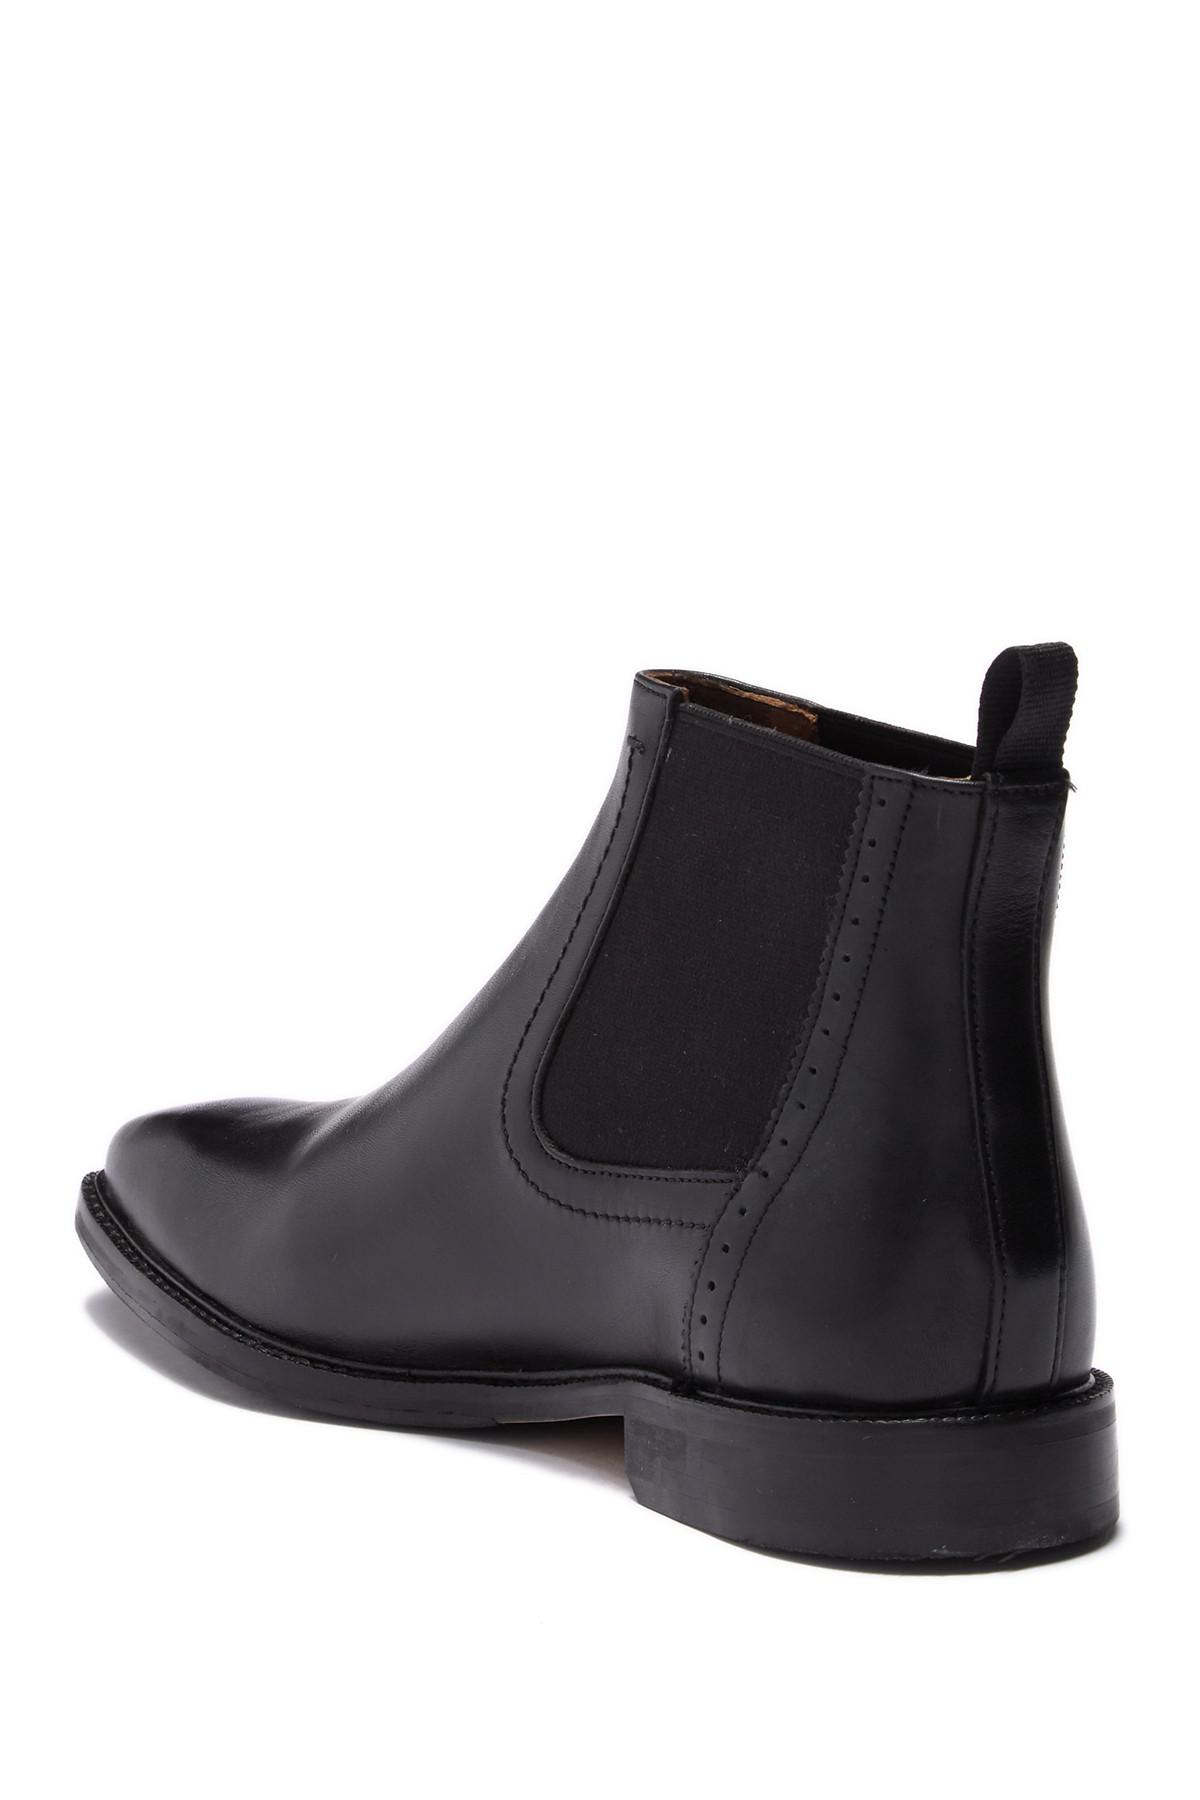 Bacco Bucci Leather Tangier Chelsea Boot in Black for Men - Lyst